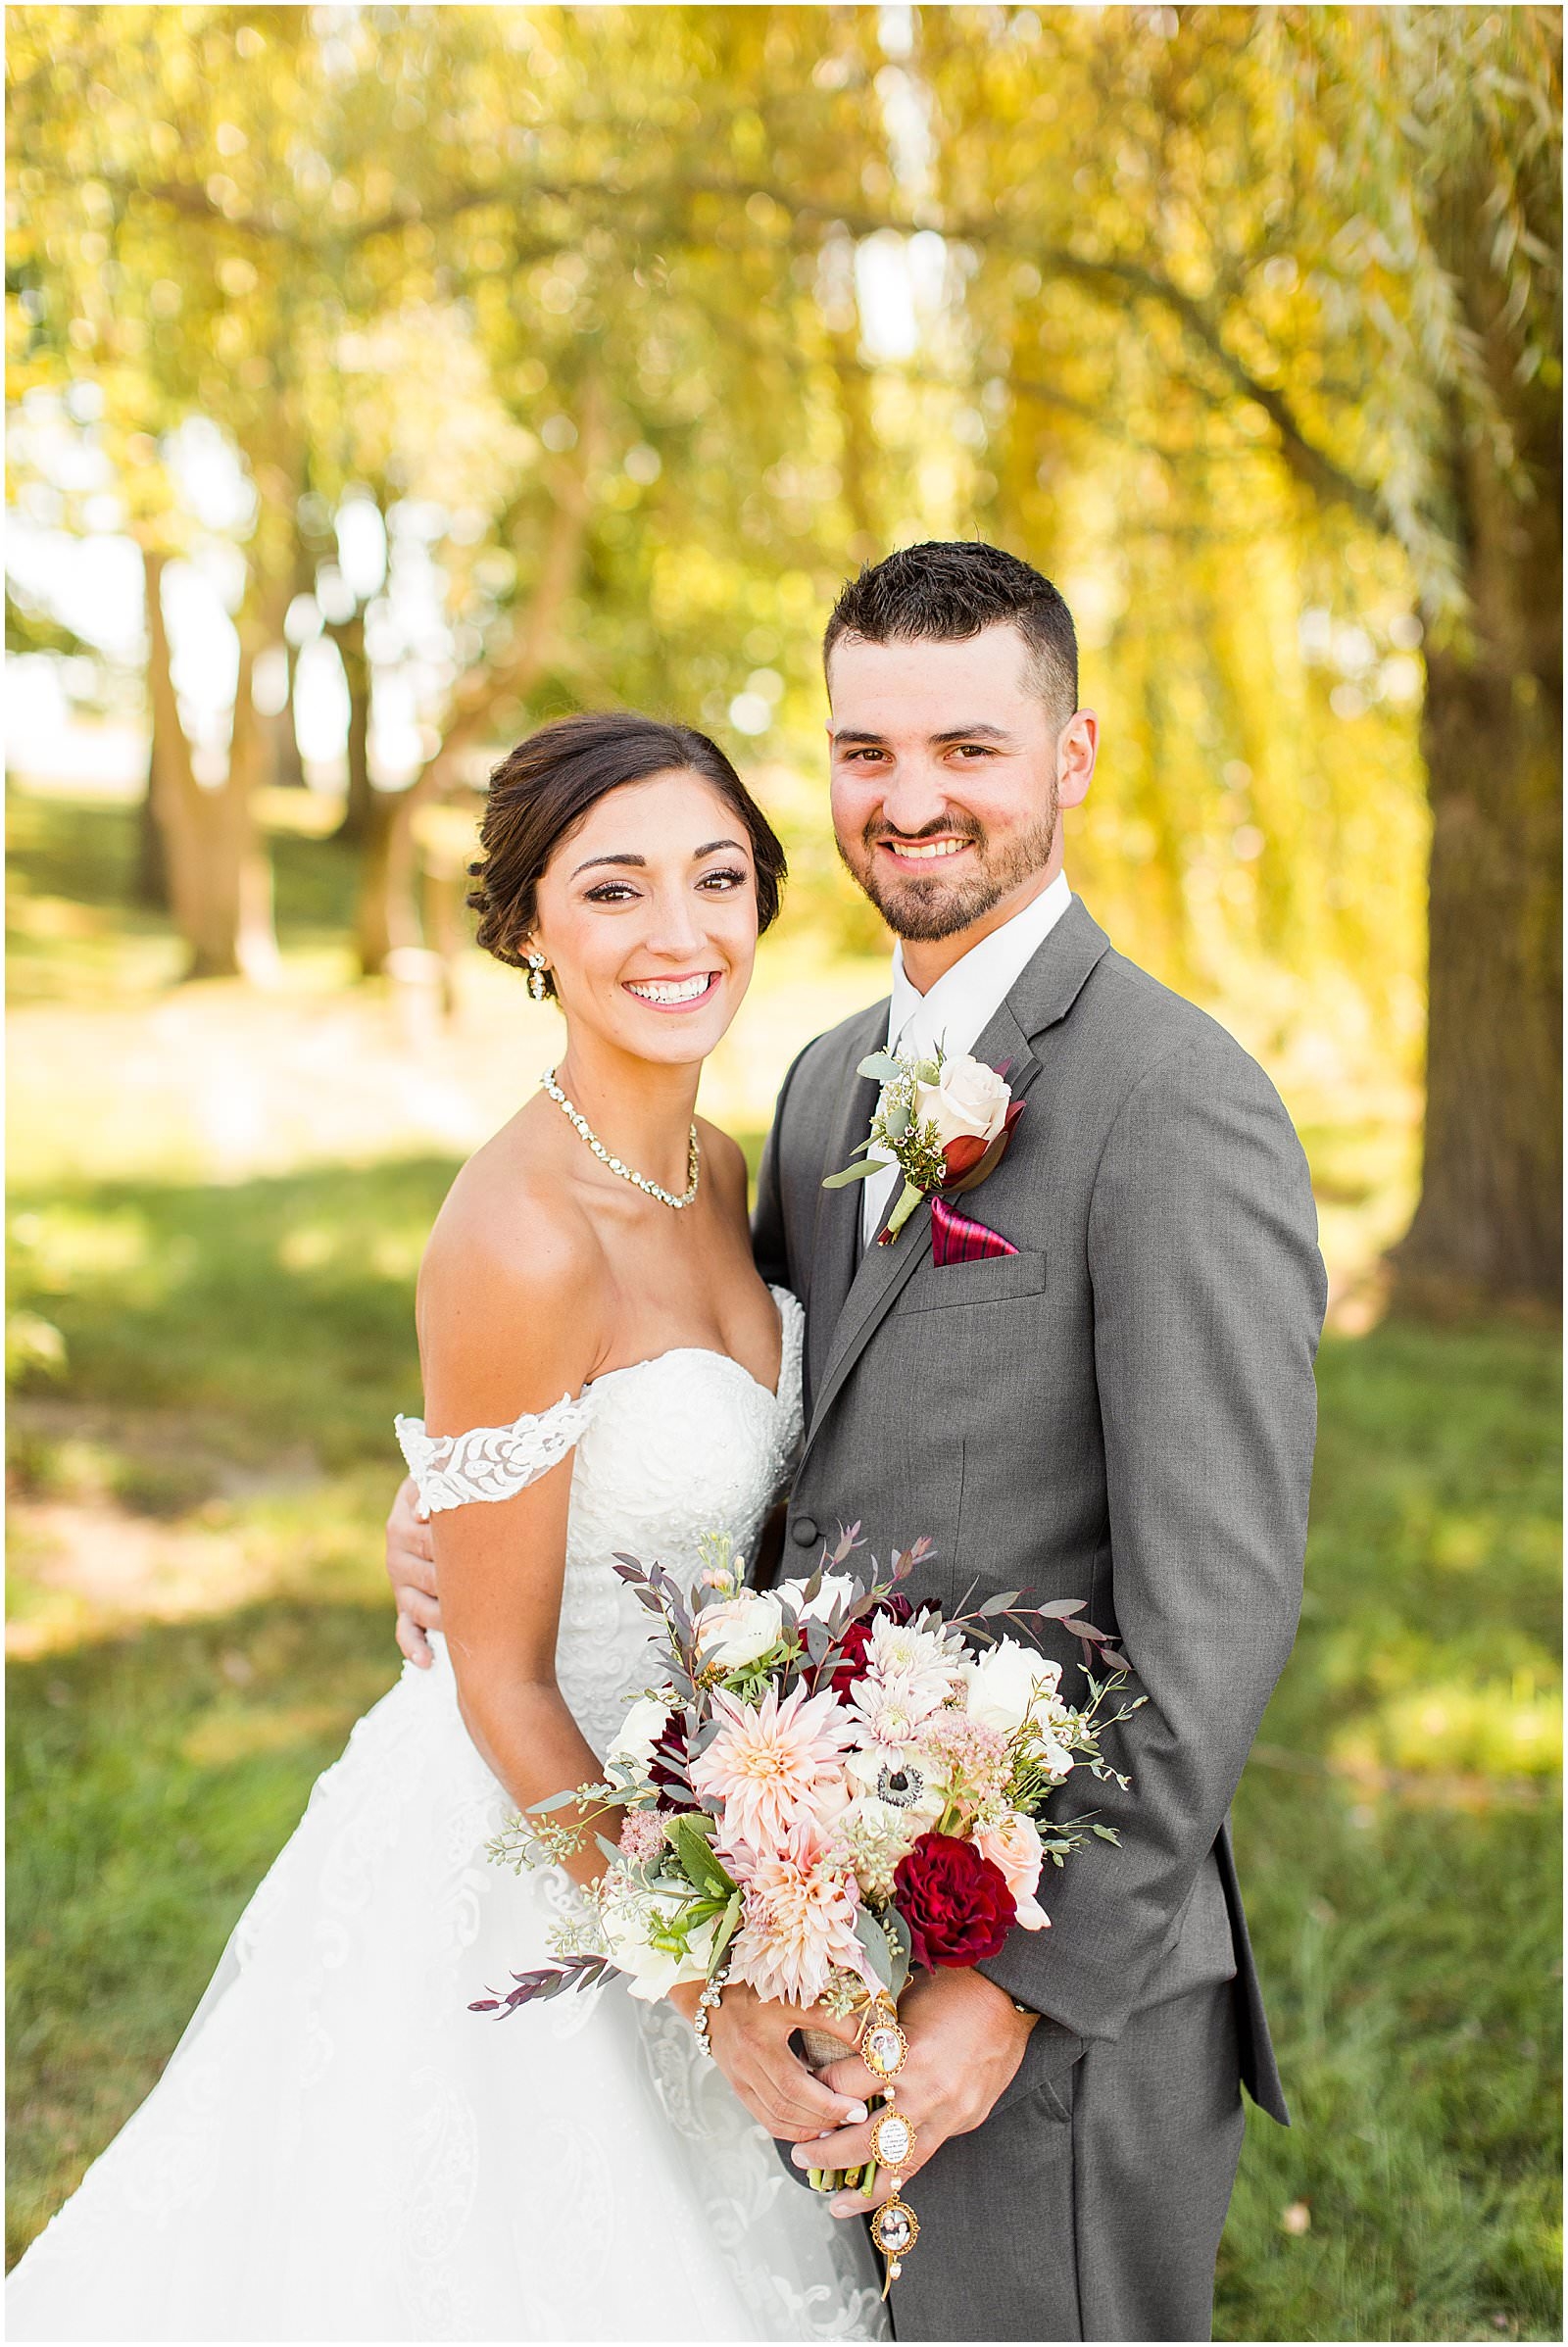 A Stunning Fall Wedding in Indianapolis, IN |. Sally and Andrew | Bret and Brandie Photography 0056.jpg